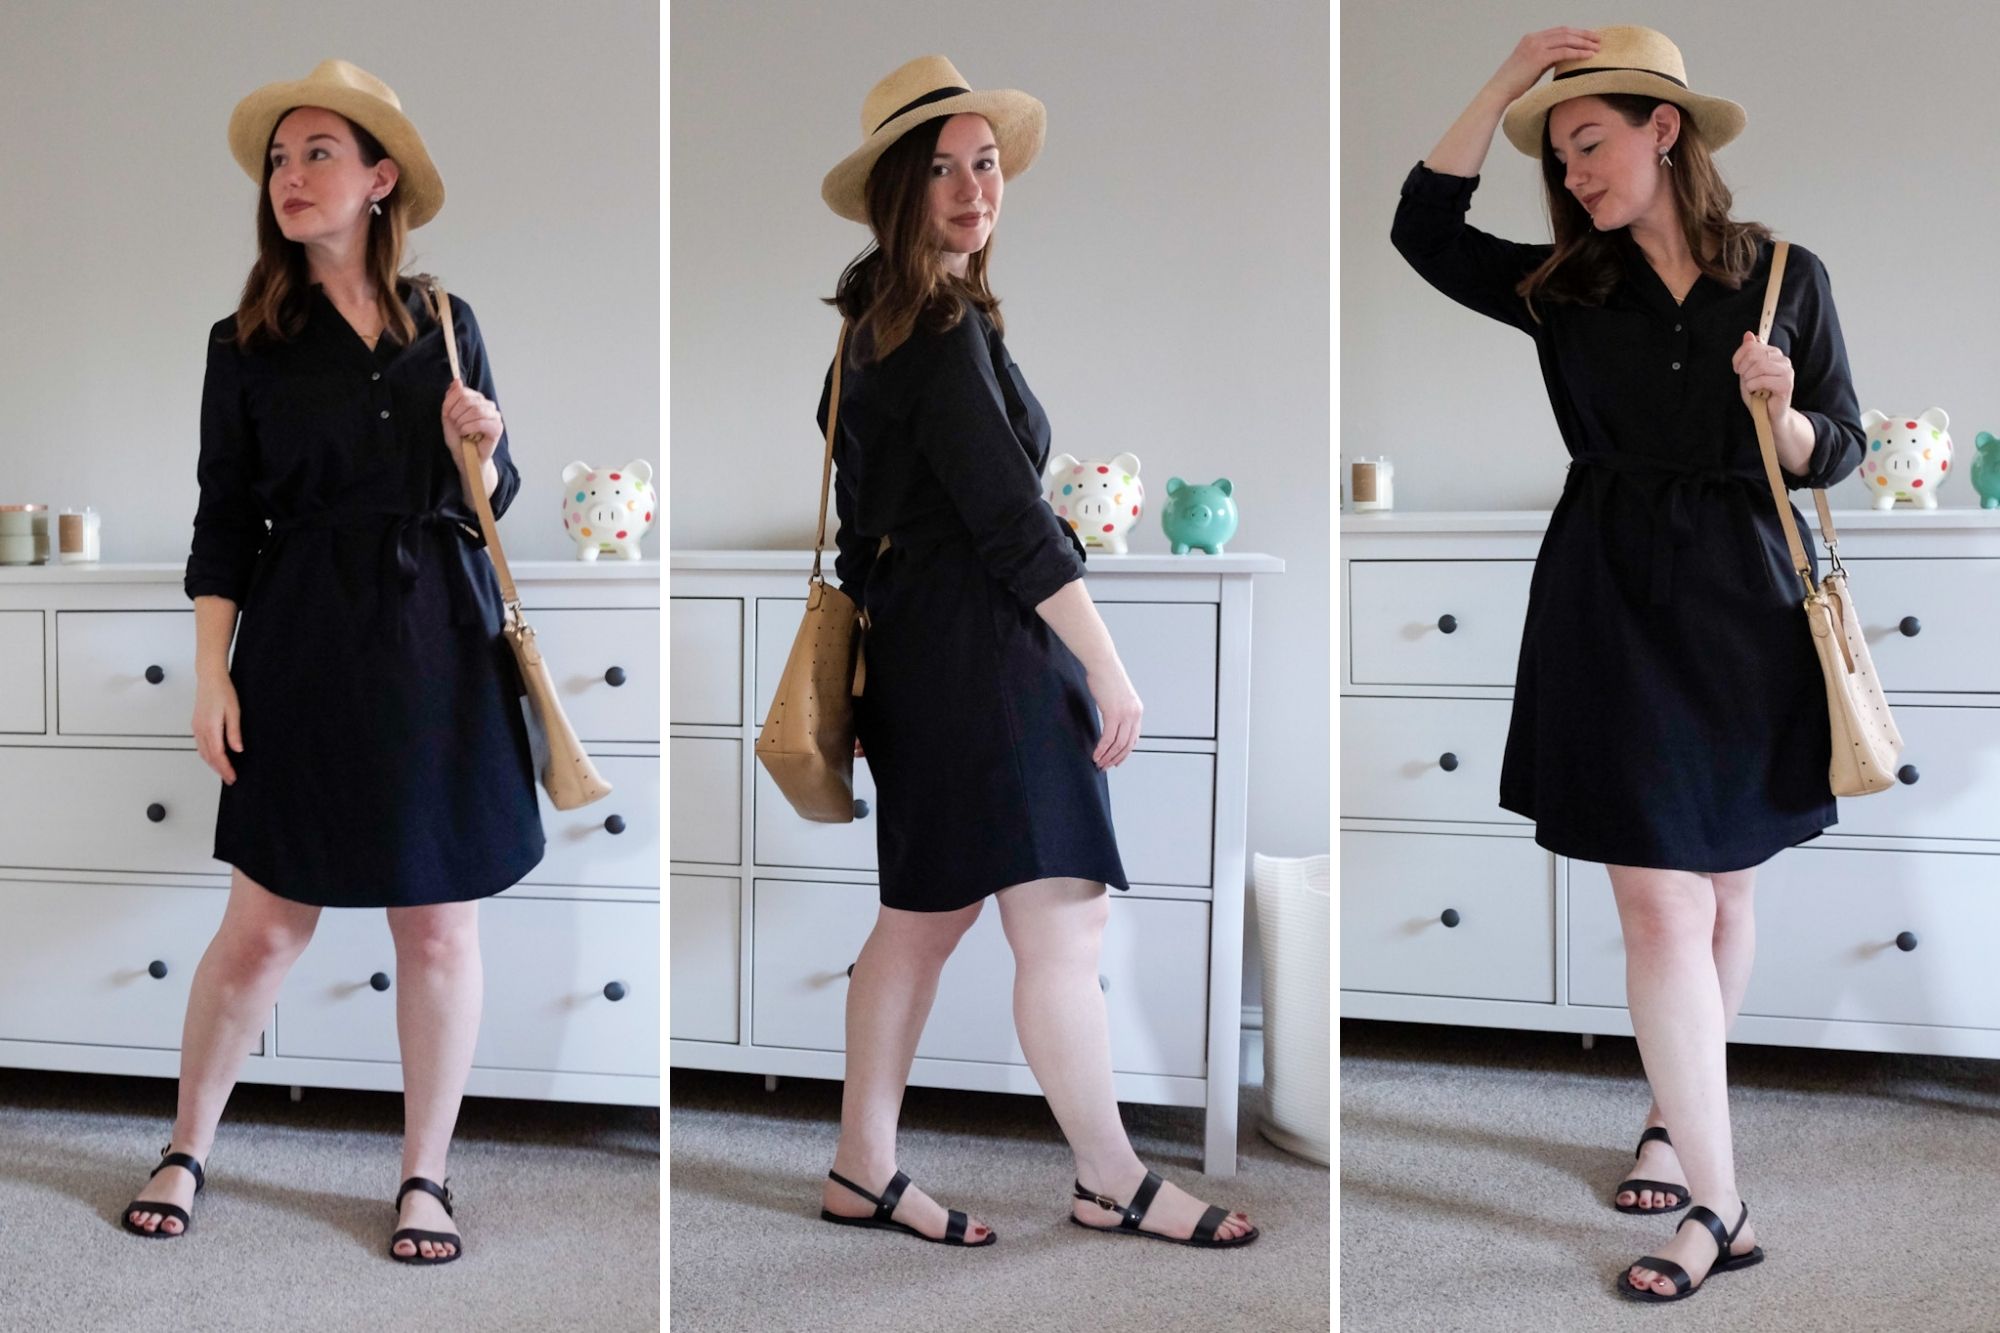 Alyssa wears the Clara dress with black sandals, a tan purse, and a Panama hat